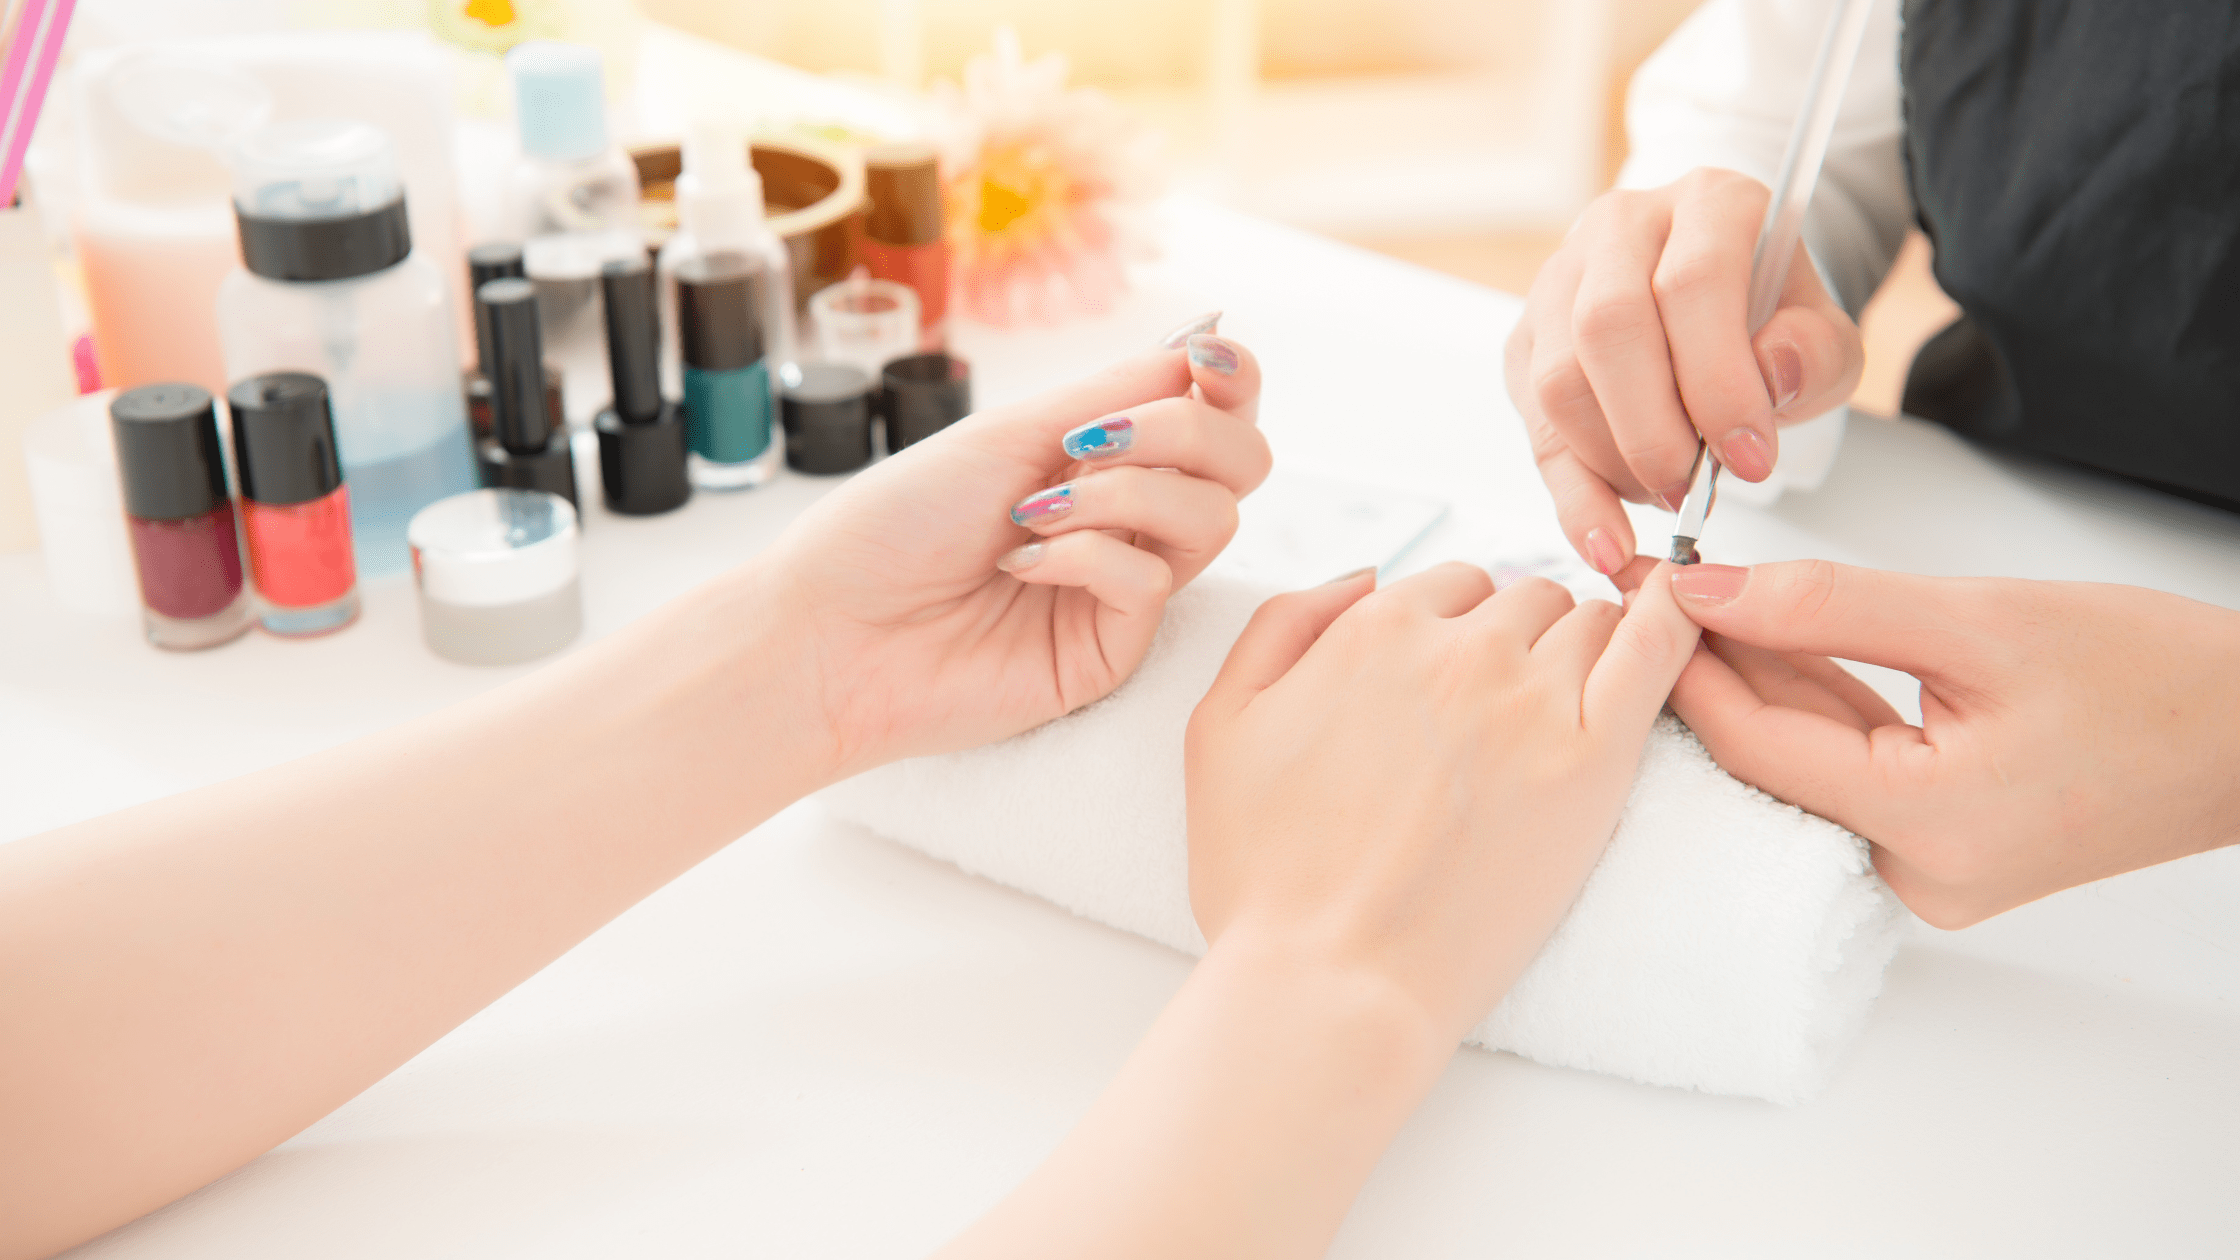 Professional manicure and pedicure session